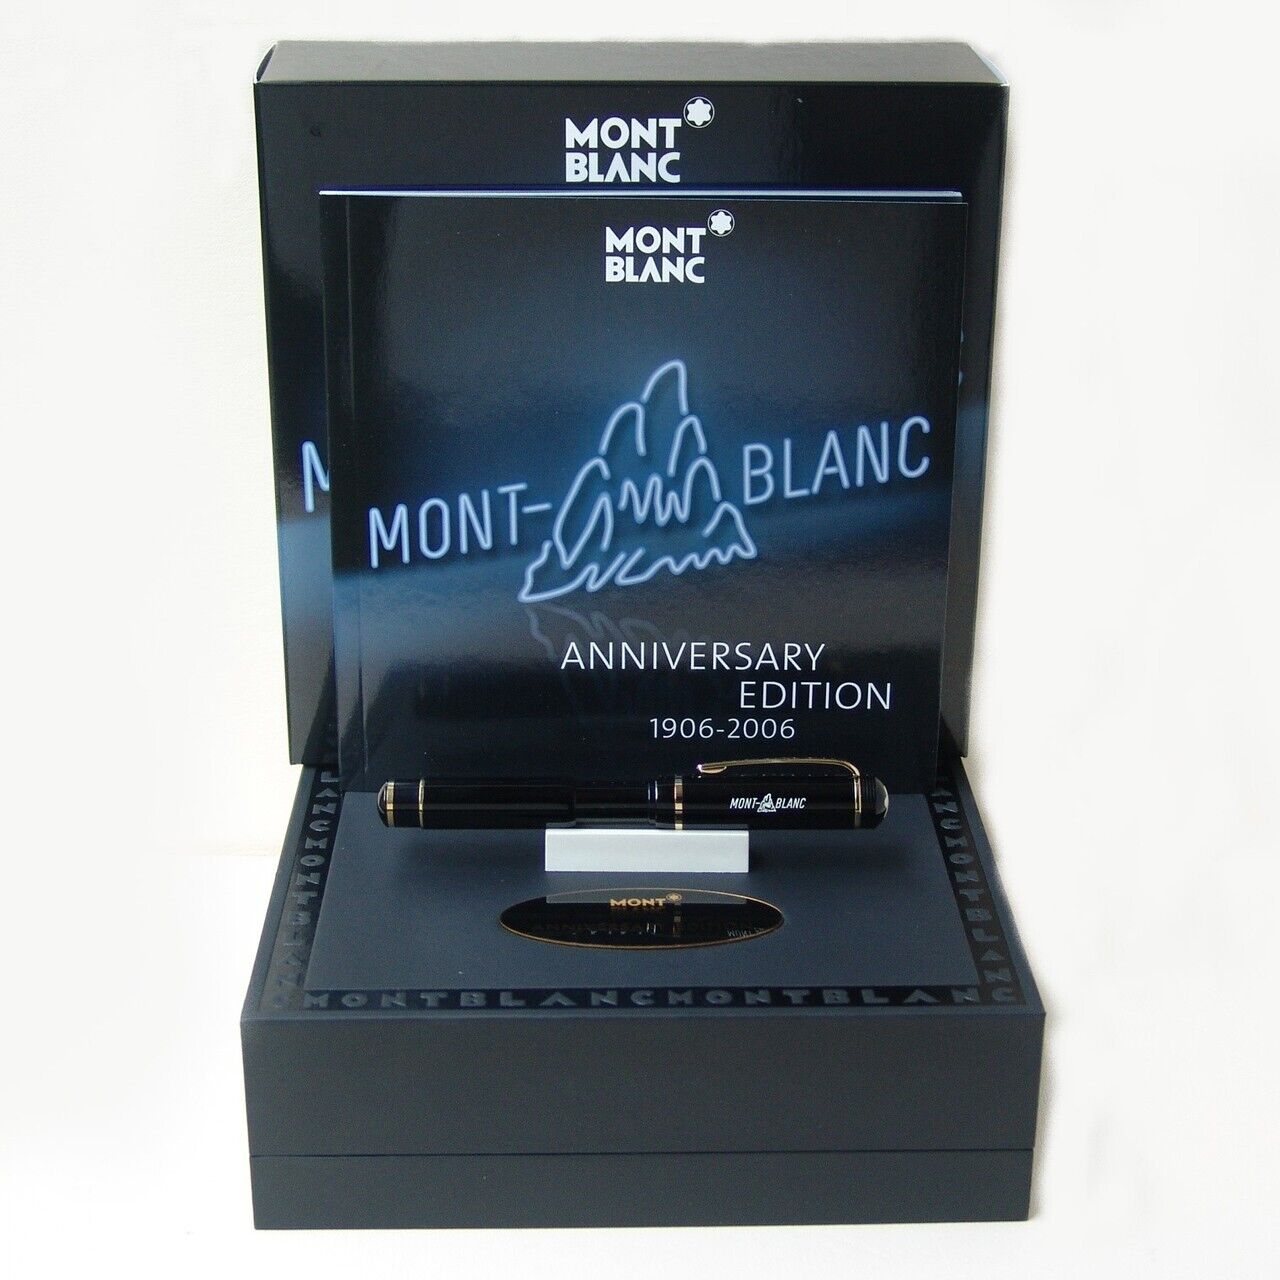 MONTBLANC 100 YEARS ANNIVERSARY LIMITED EDITION FOUNTAIN PEN - M- BRAND NEW